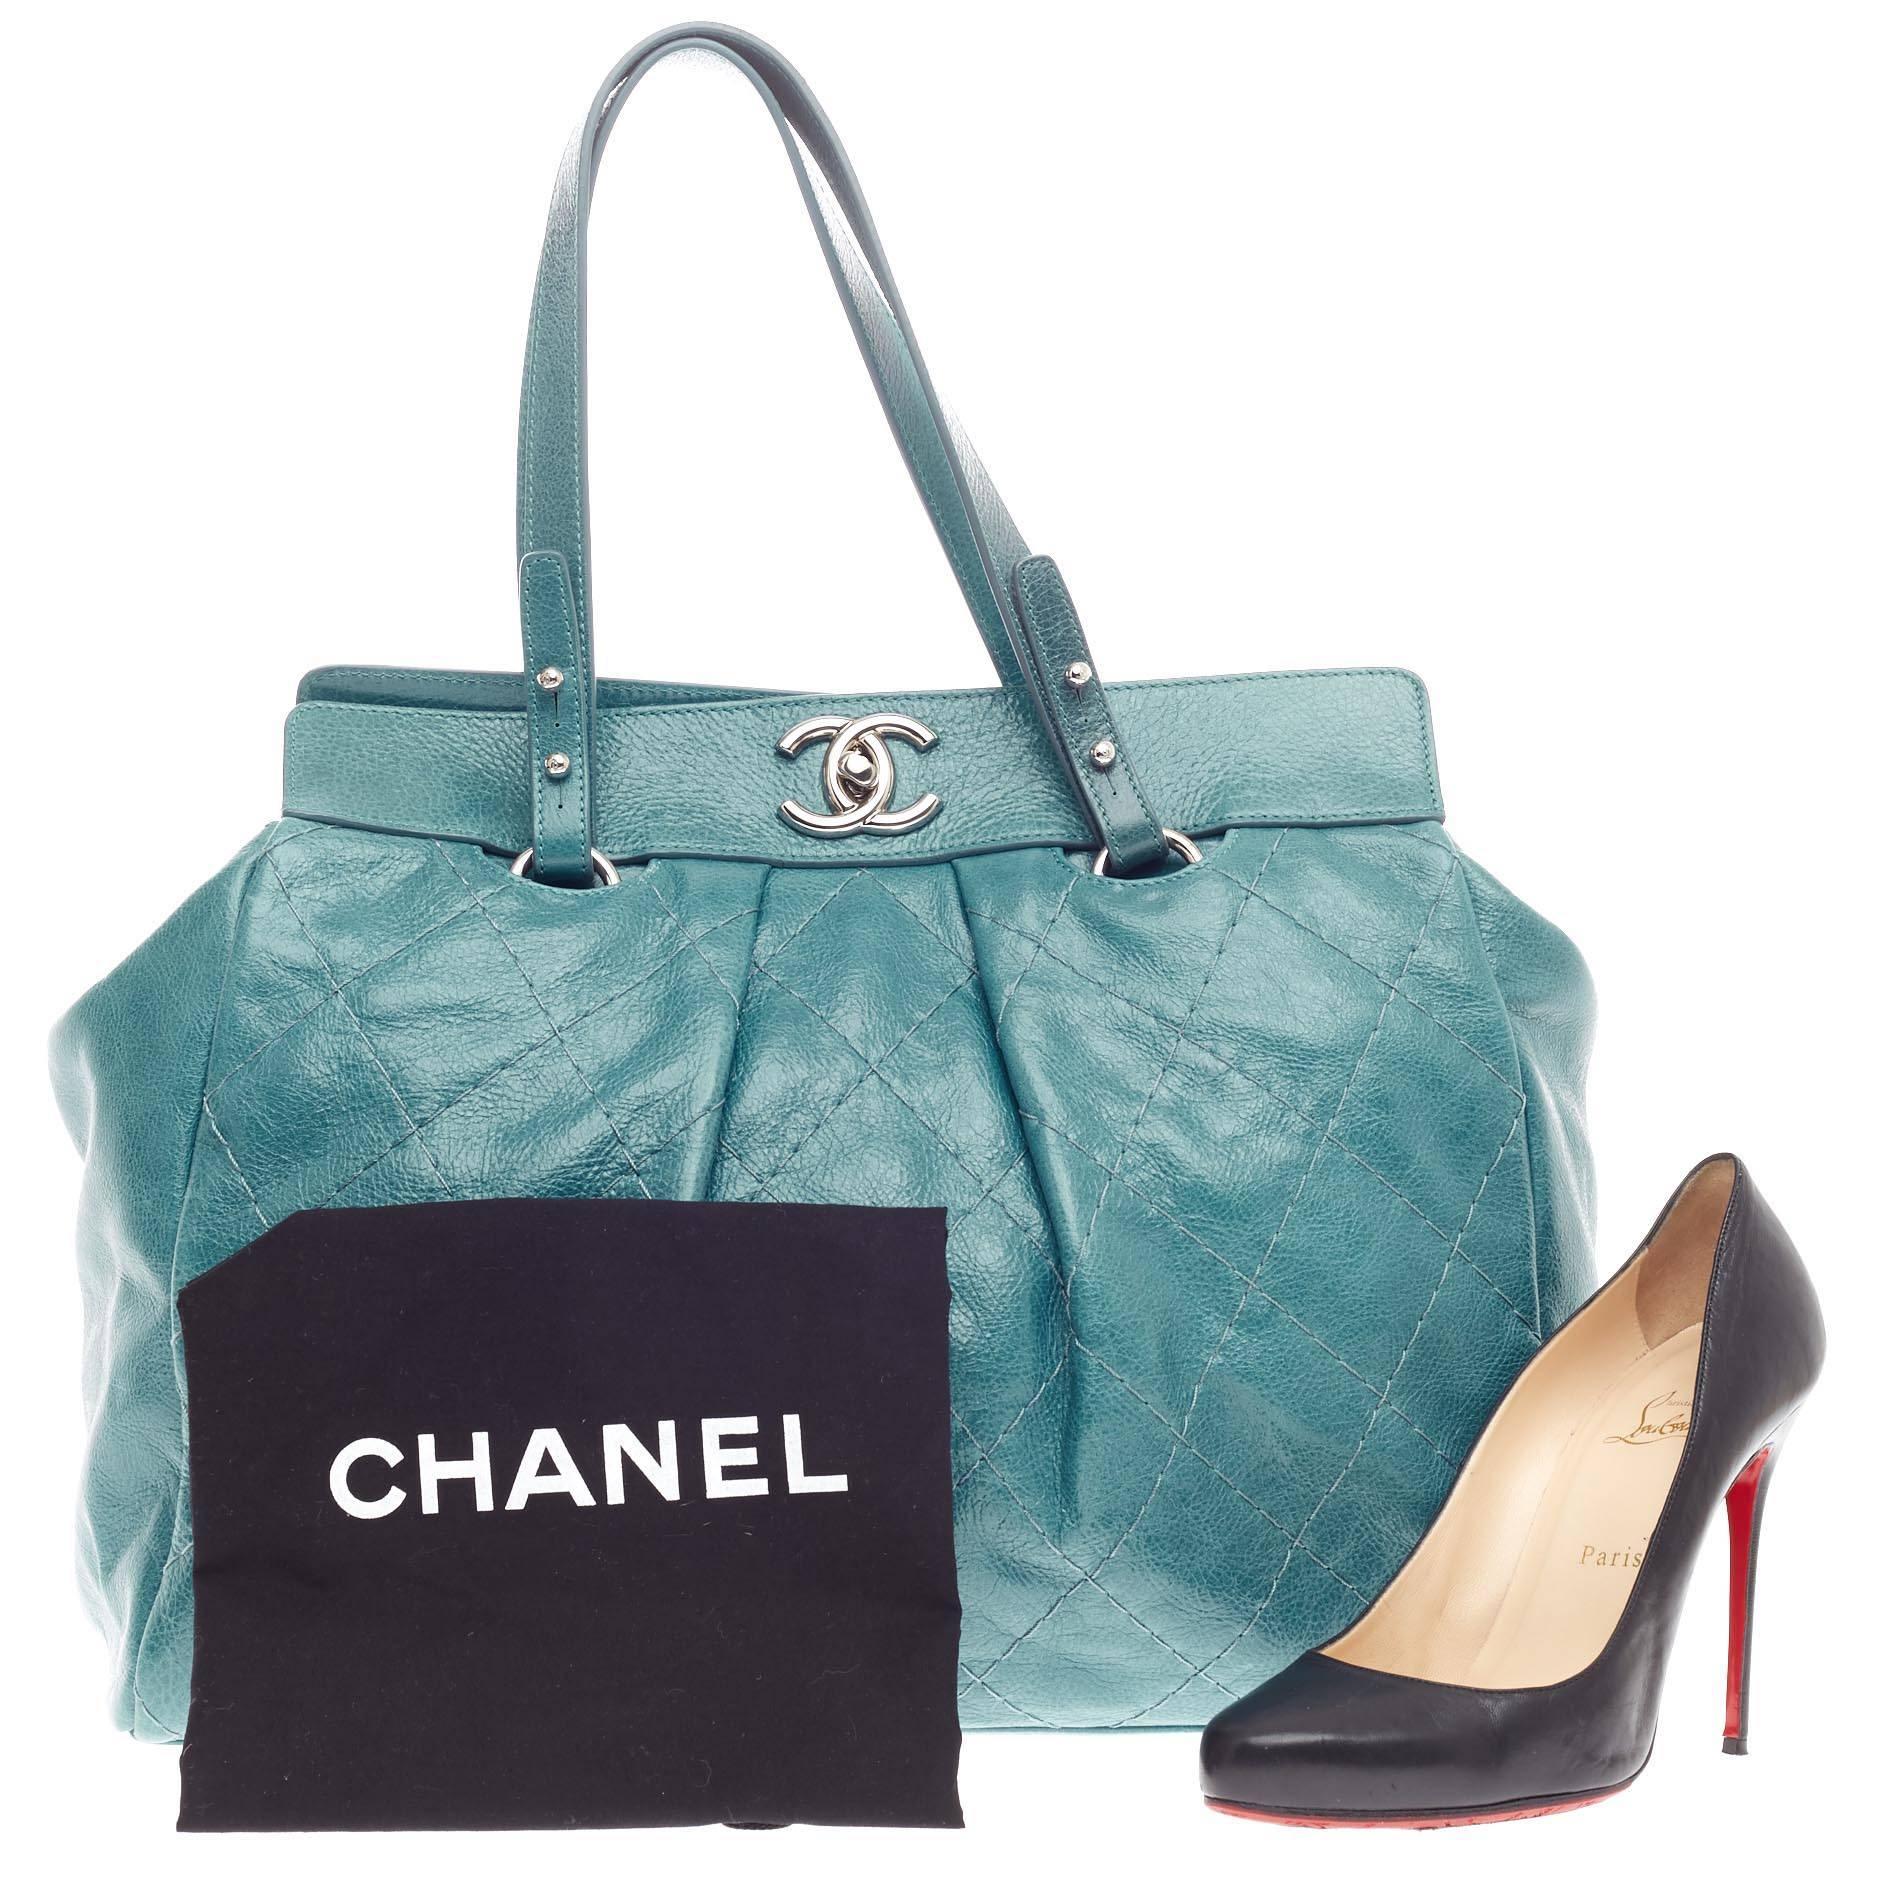 This authentic Chanel On the Road Frame Tote Glazed Leather showcases the brand's classic style with everyday functionality perfect for the modern woman. Crafted from deep teal glazed quilted leather with blue undertones, this tote features a soft